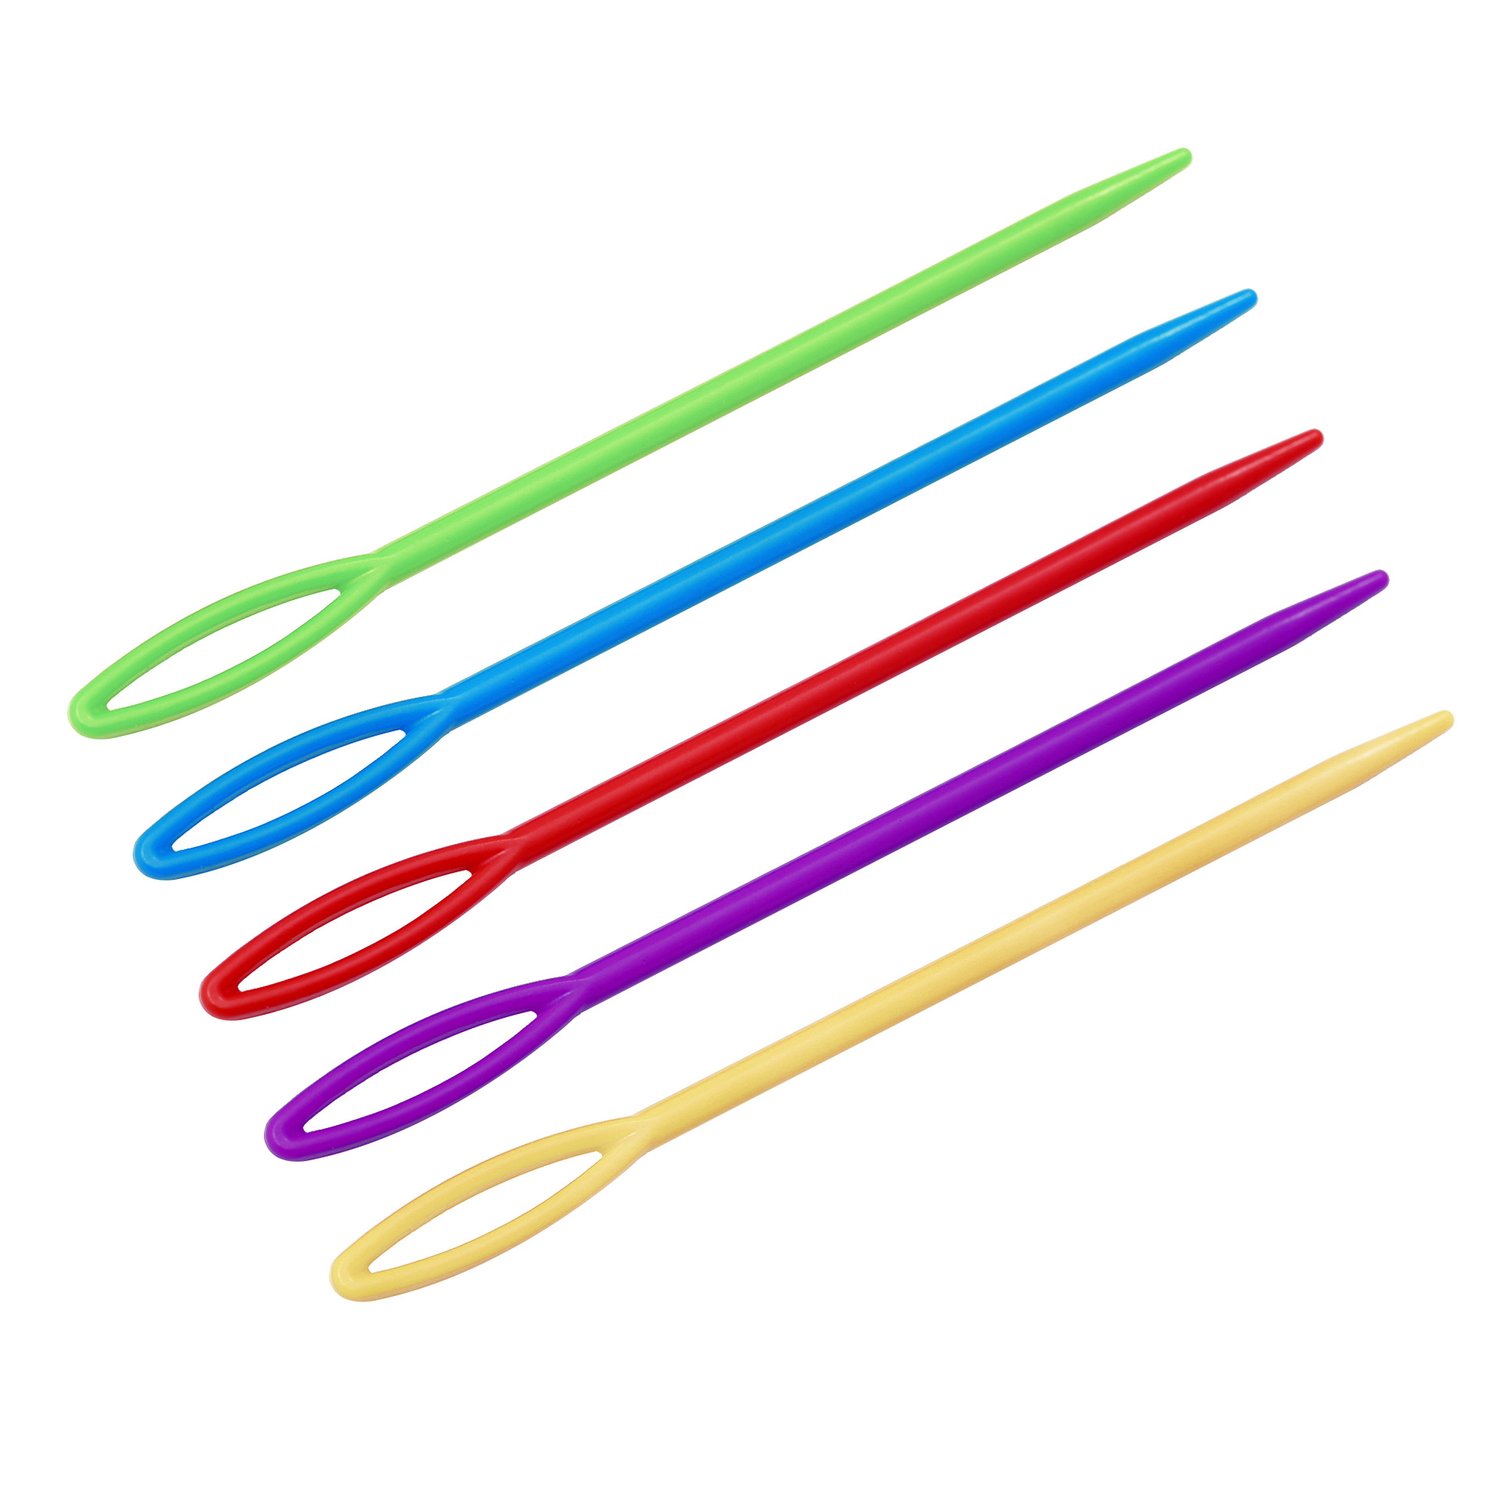 10pc Plastic Yarn Needles Knit and Crochet Assorted Color 